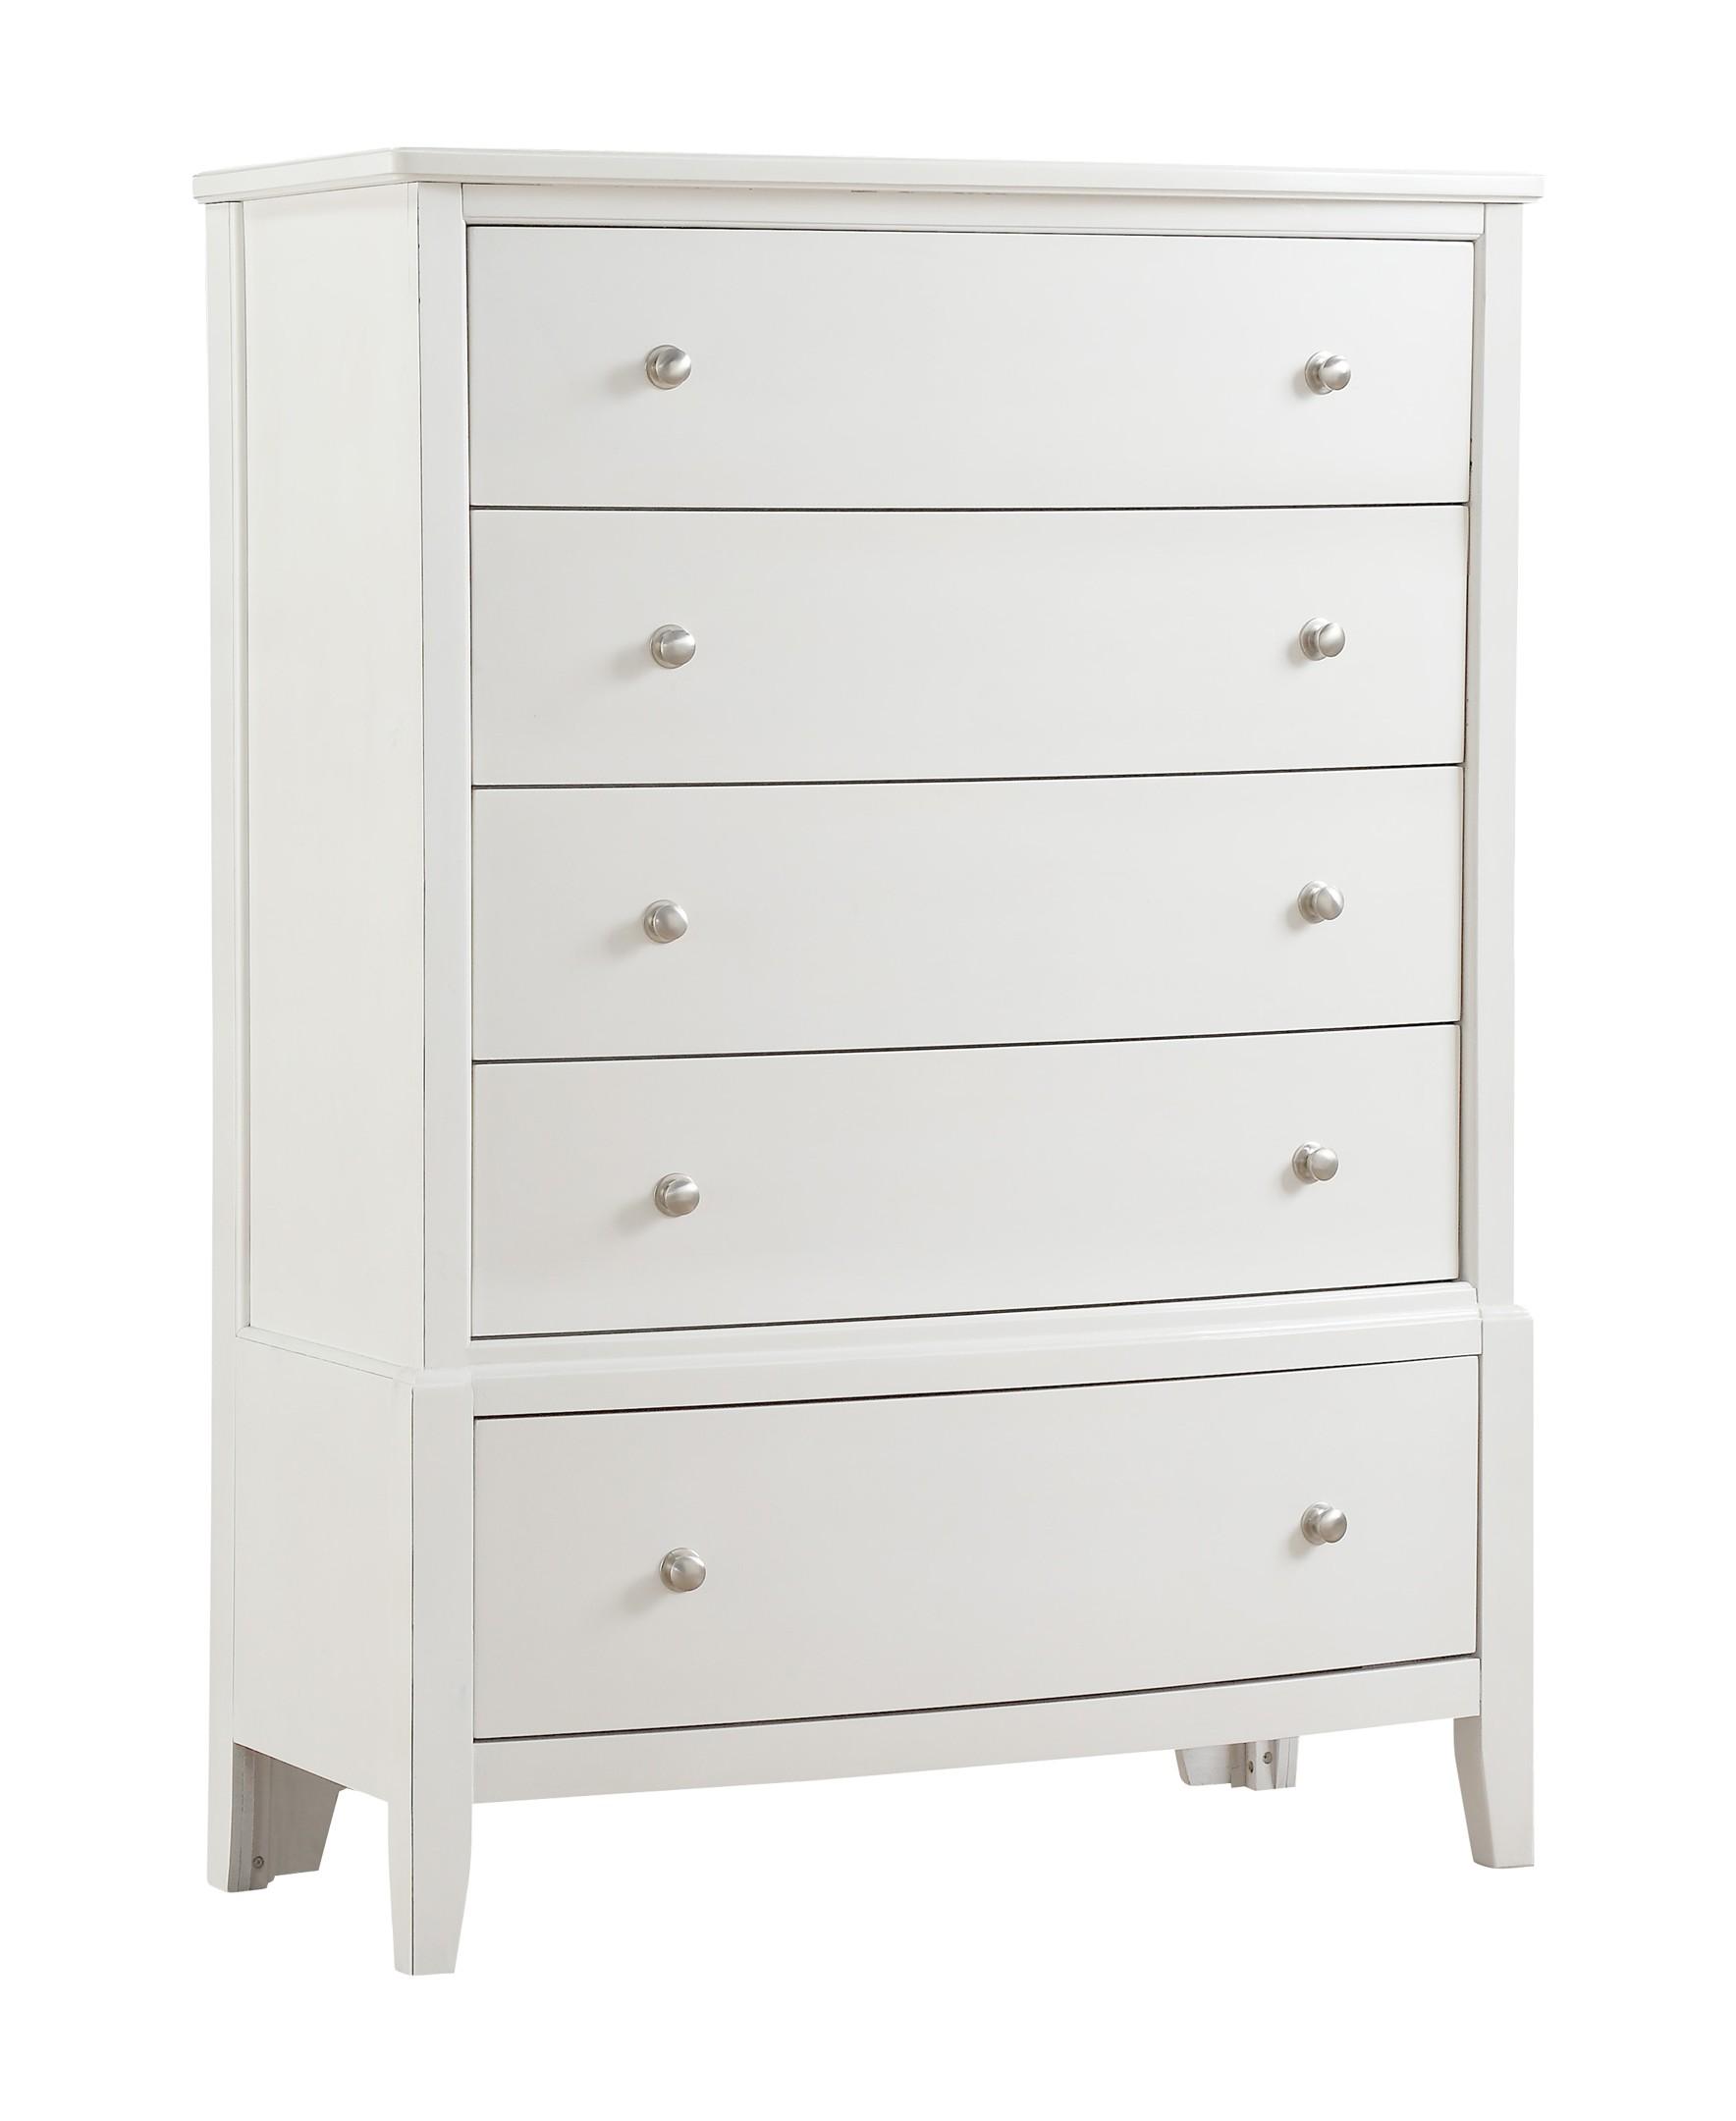 Transitional Chest 1730WW-9 Cotterill 1730WW-9 in Antique White 